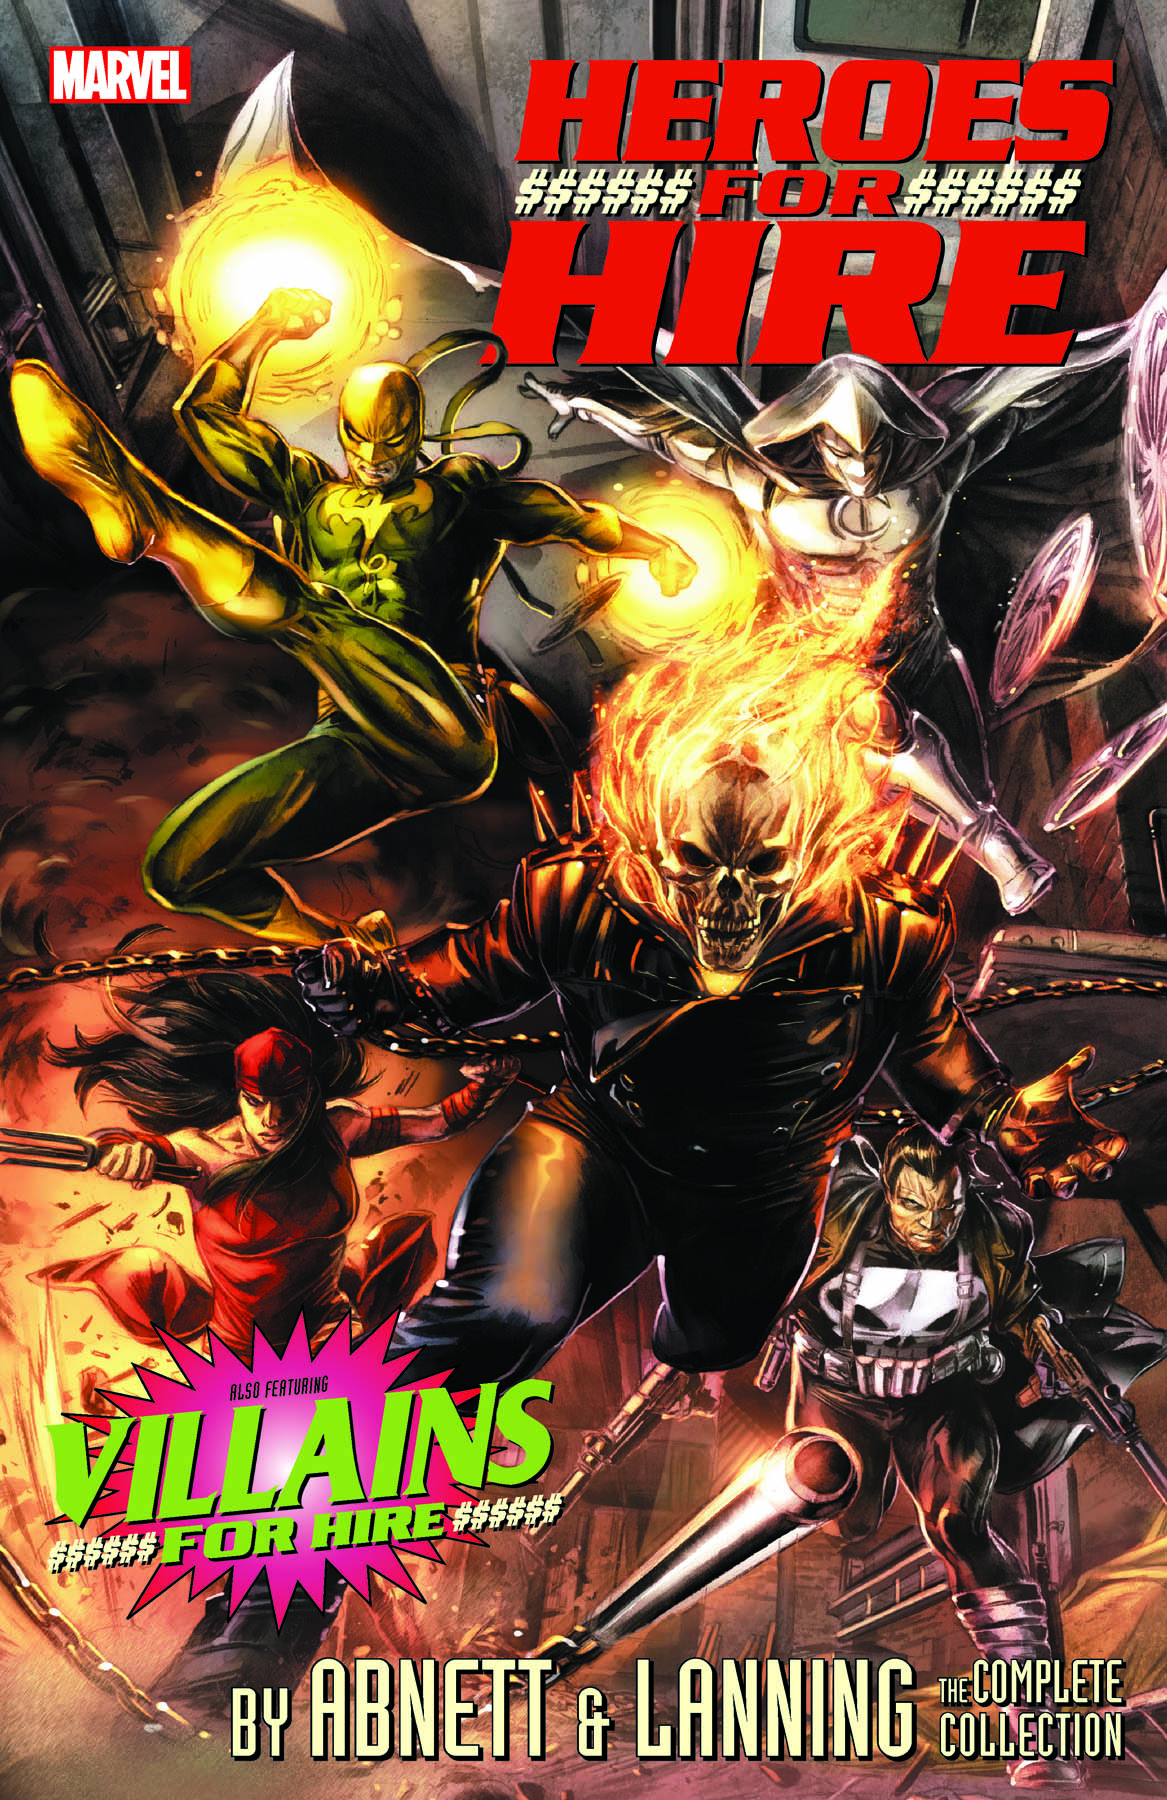 HEROES FOR HIRE BY ABNETT & LANNING: THE COMPLETE COLLECTION TPB (Trade Paperback)